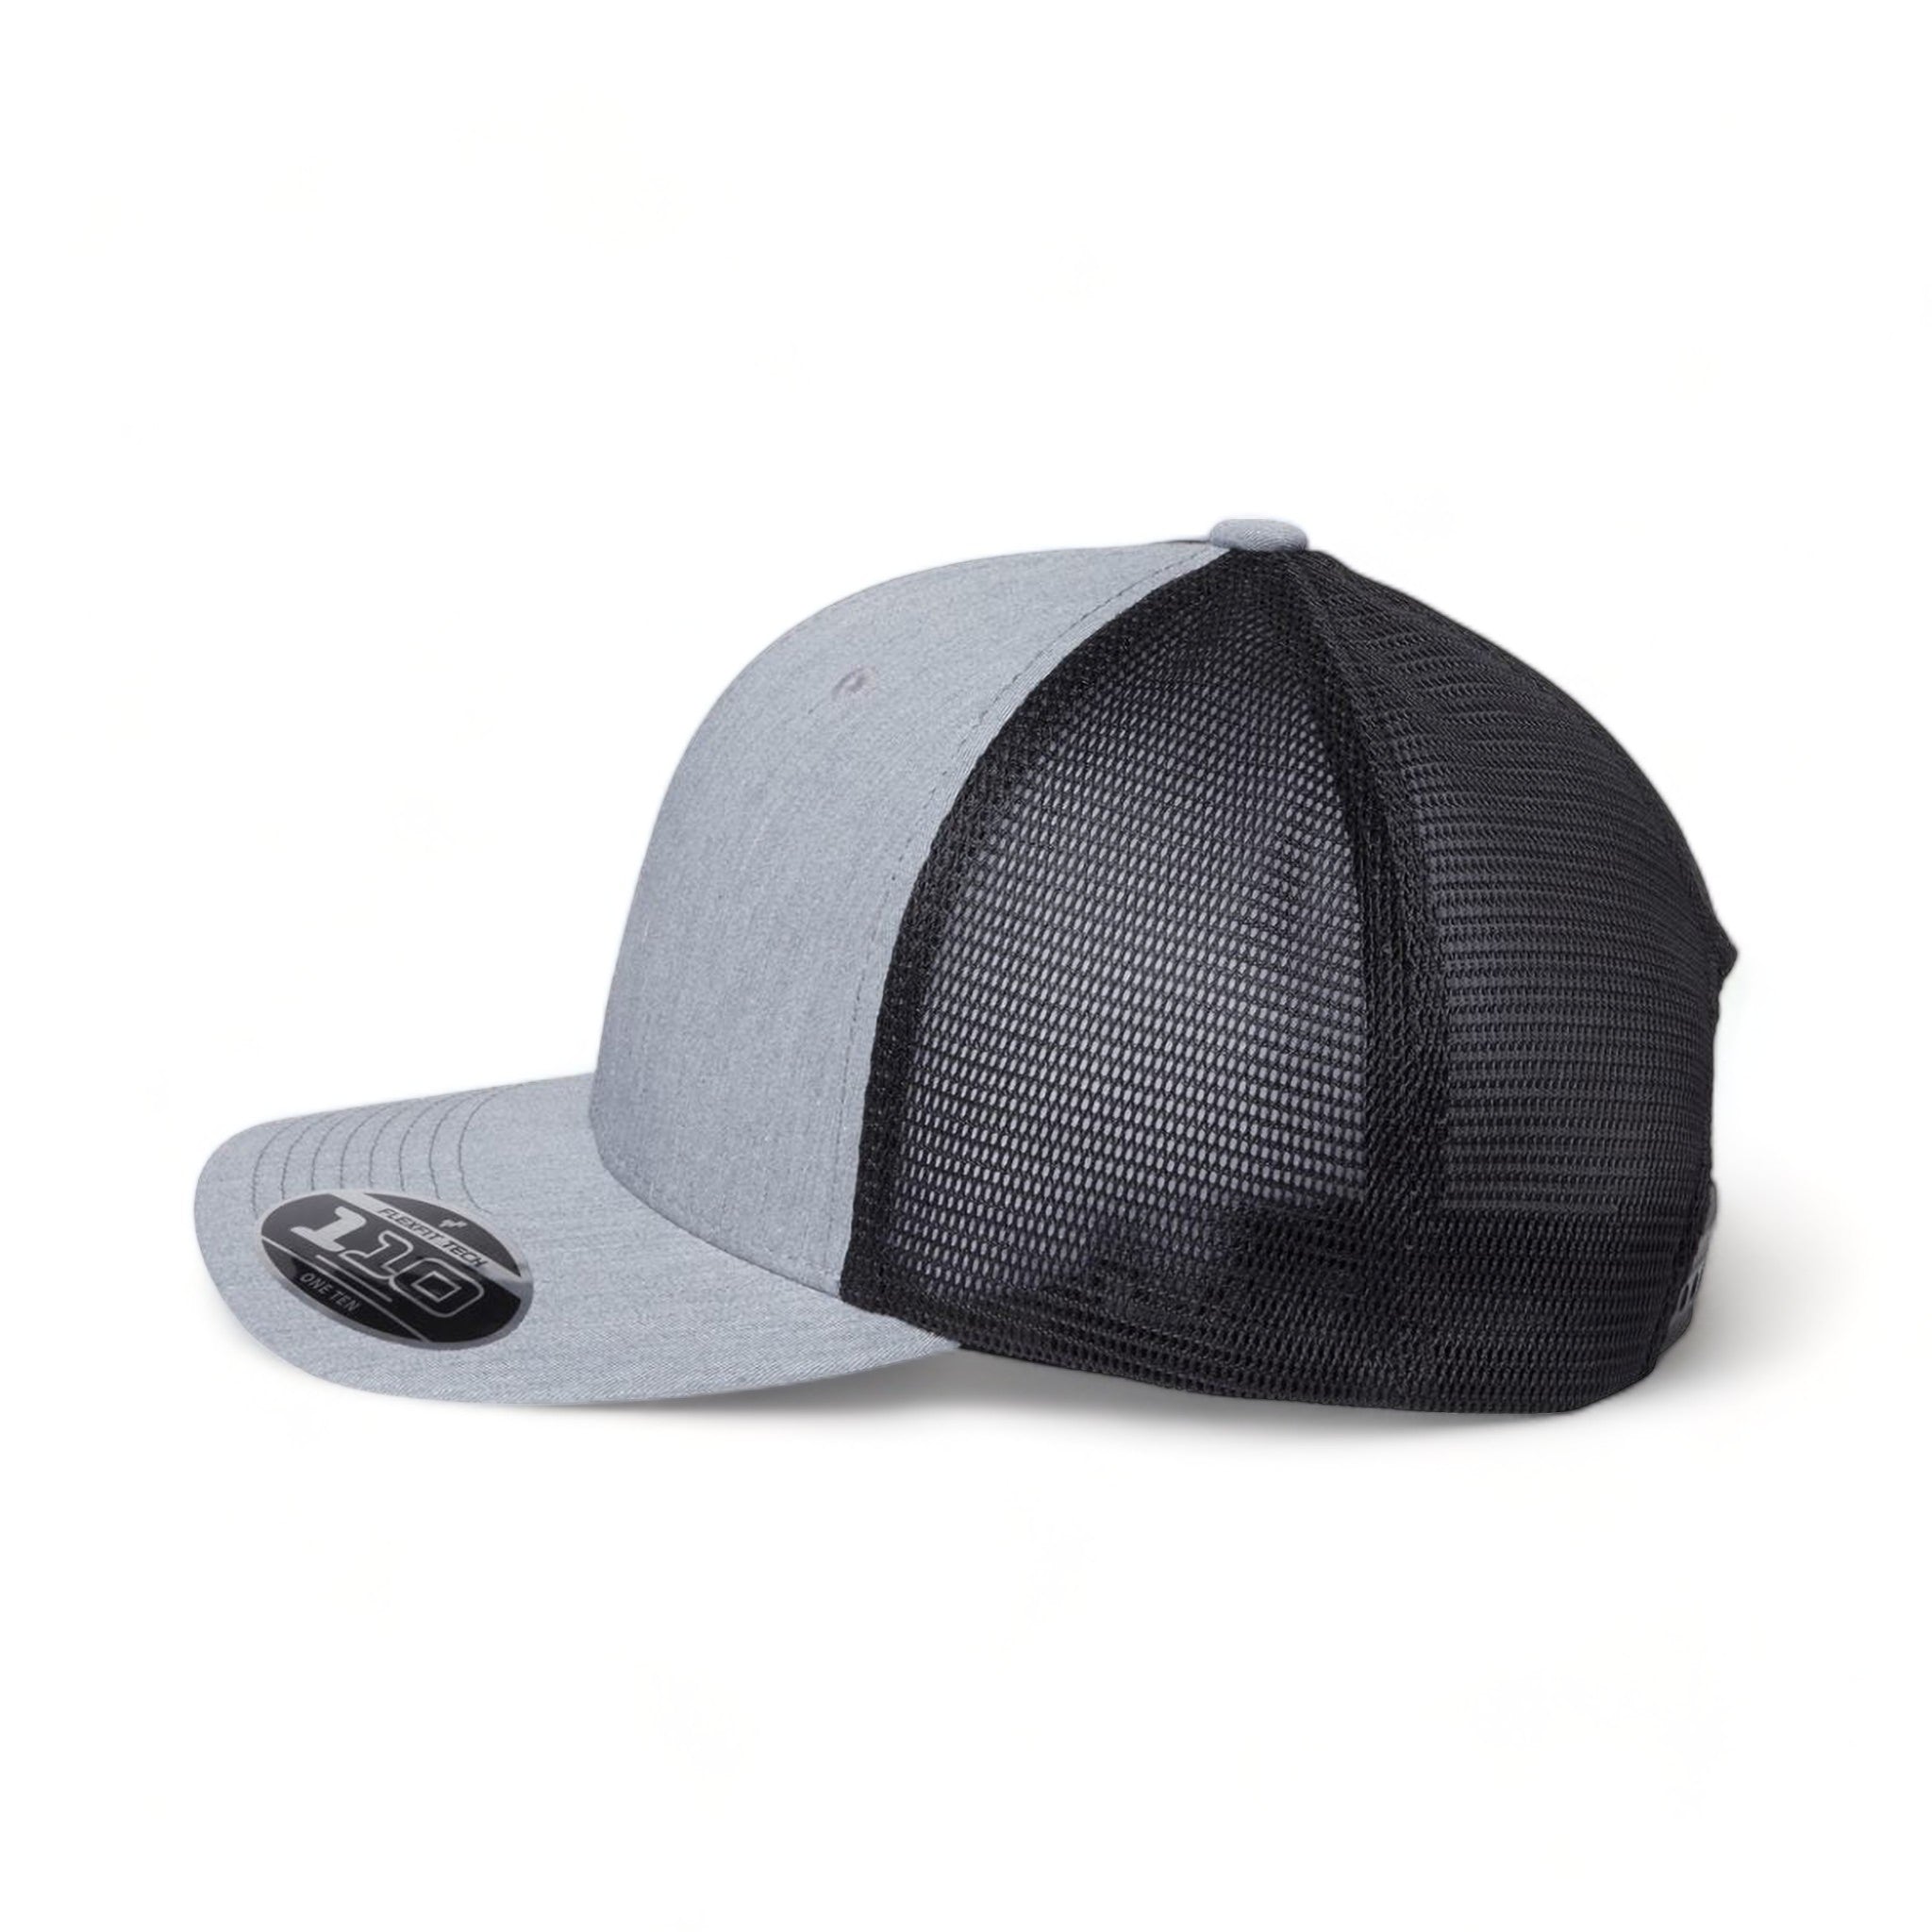 Side view of Flexfit 110M custom hat in heather grey and black